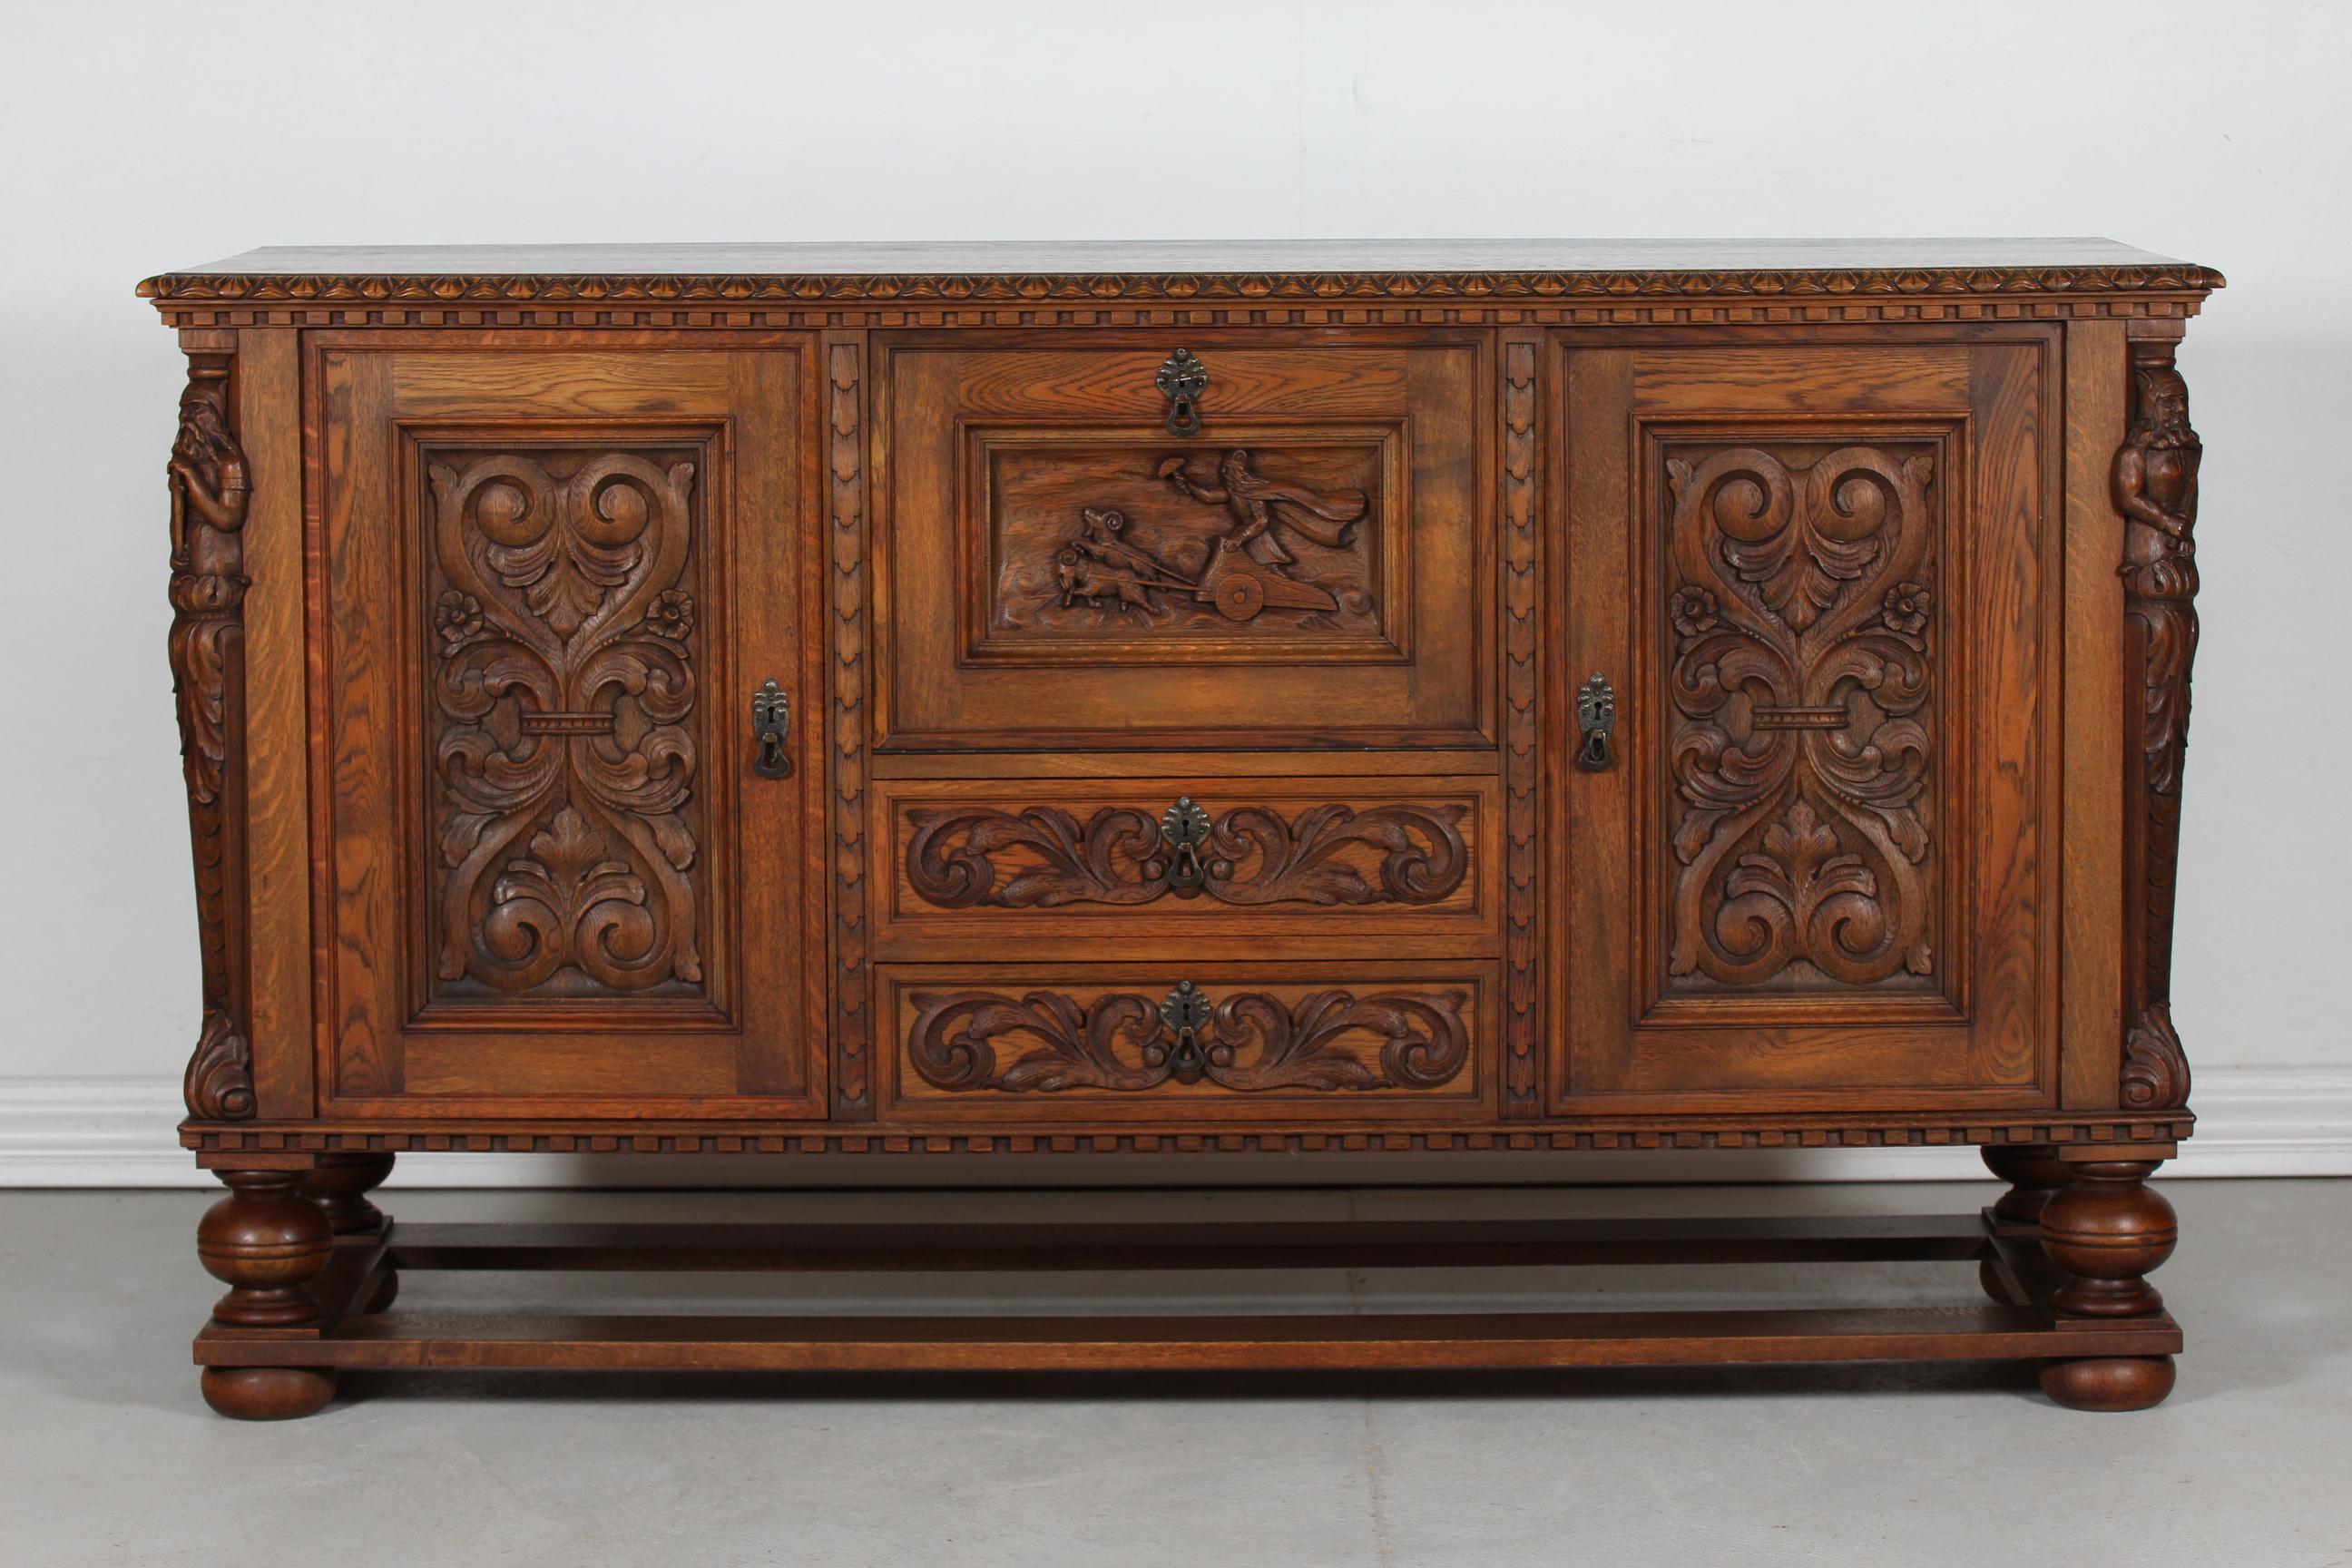 Danish Historicism sideboard in solid oak, made in the early 20th century by a Danish cabinetmaker.
Chunky legs and a sculptural front with hand-carved figures of Odin and Thor from the Danish history of Nordic mythology.

This sideboard would